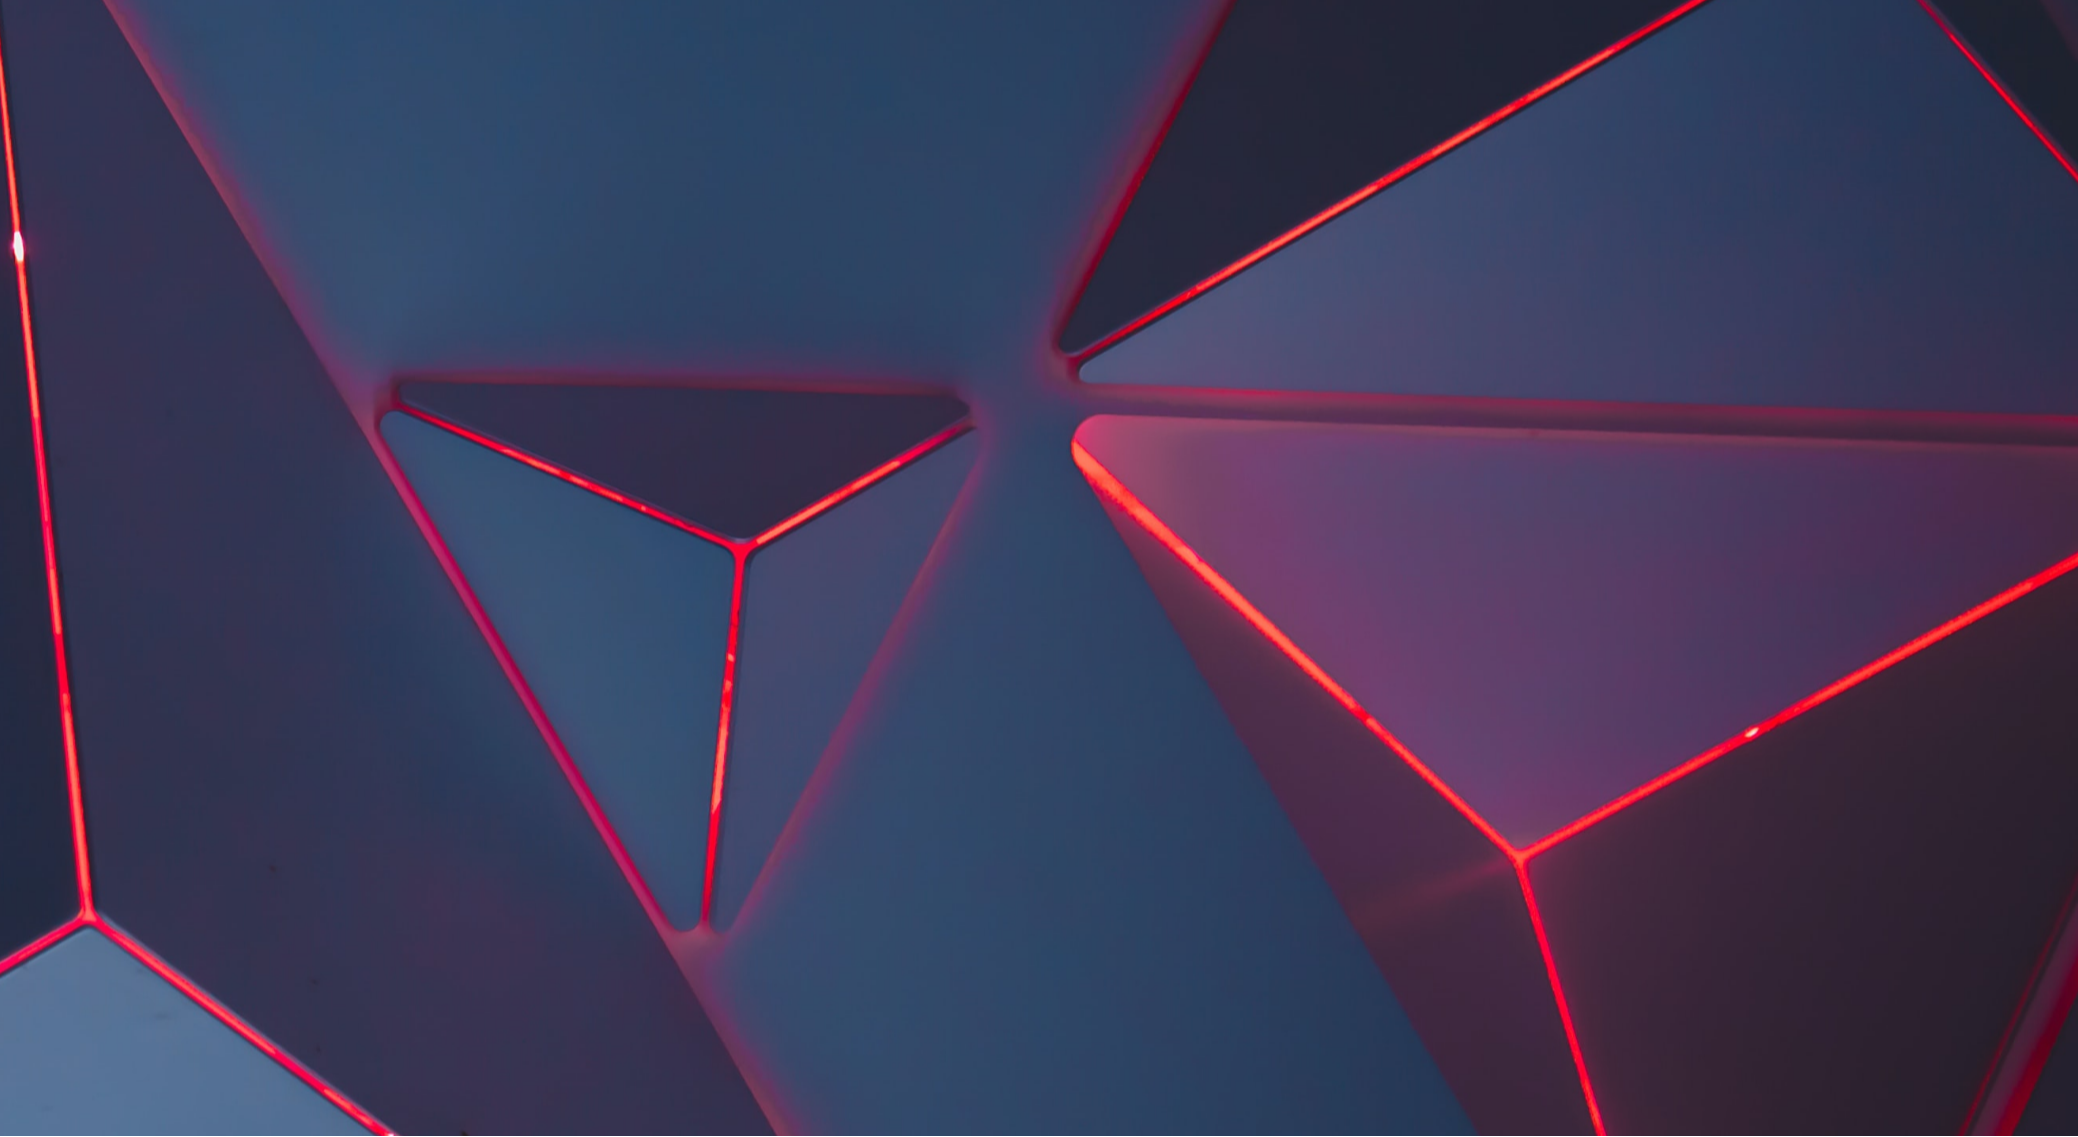 Triangular shapes in red and dark grey colours